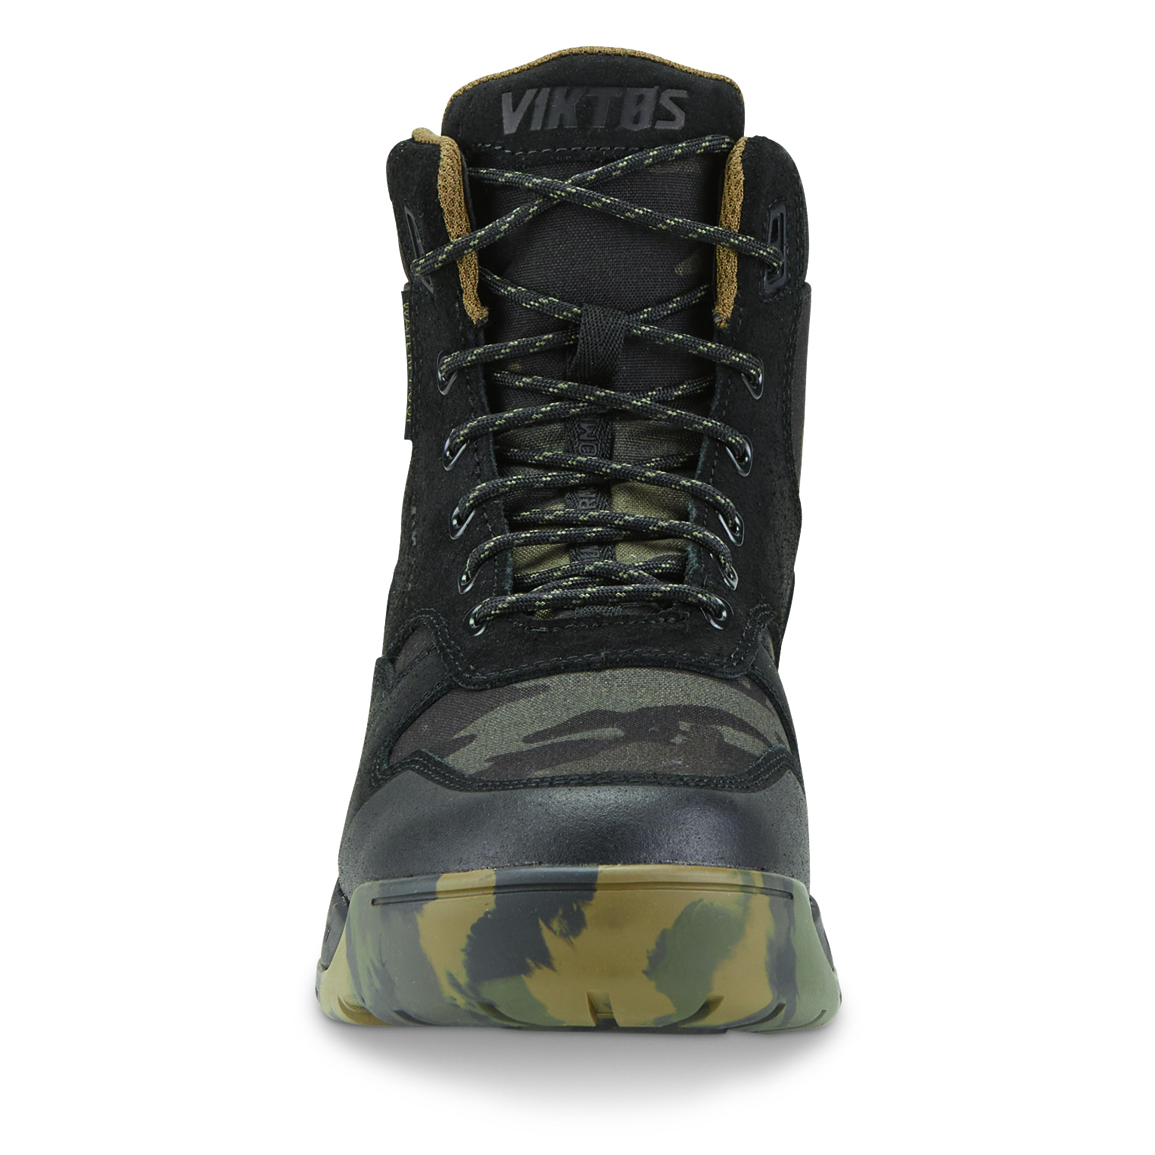 Reinforced leather and nylon upper provides durability without excess weight, Multicam® Black